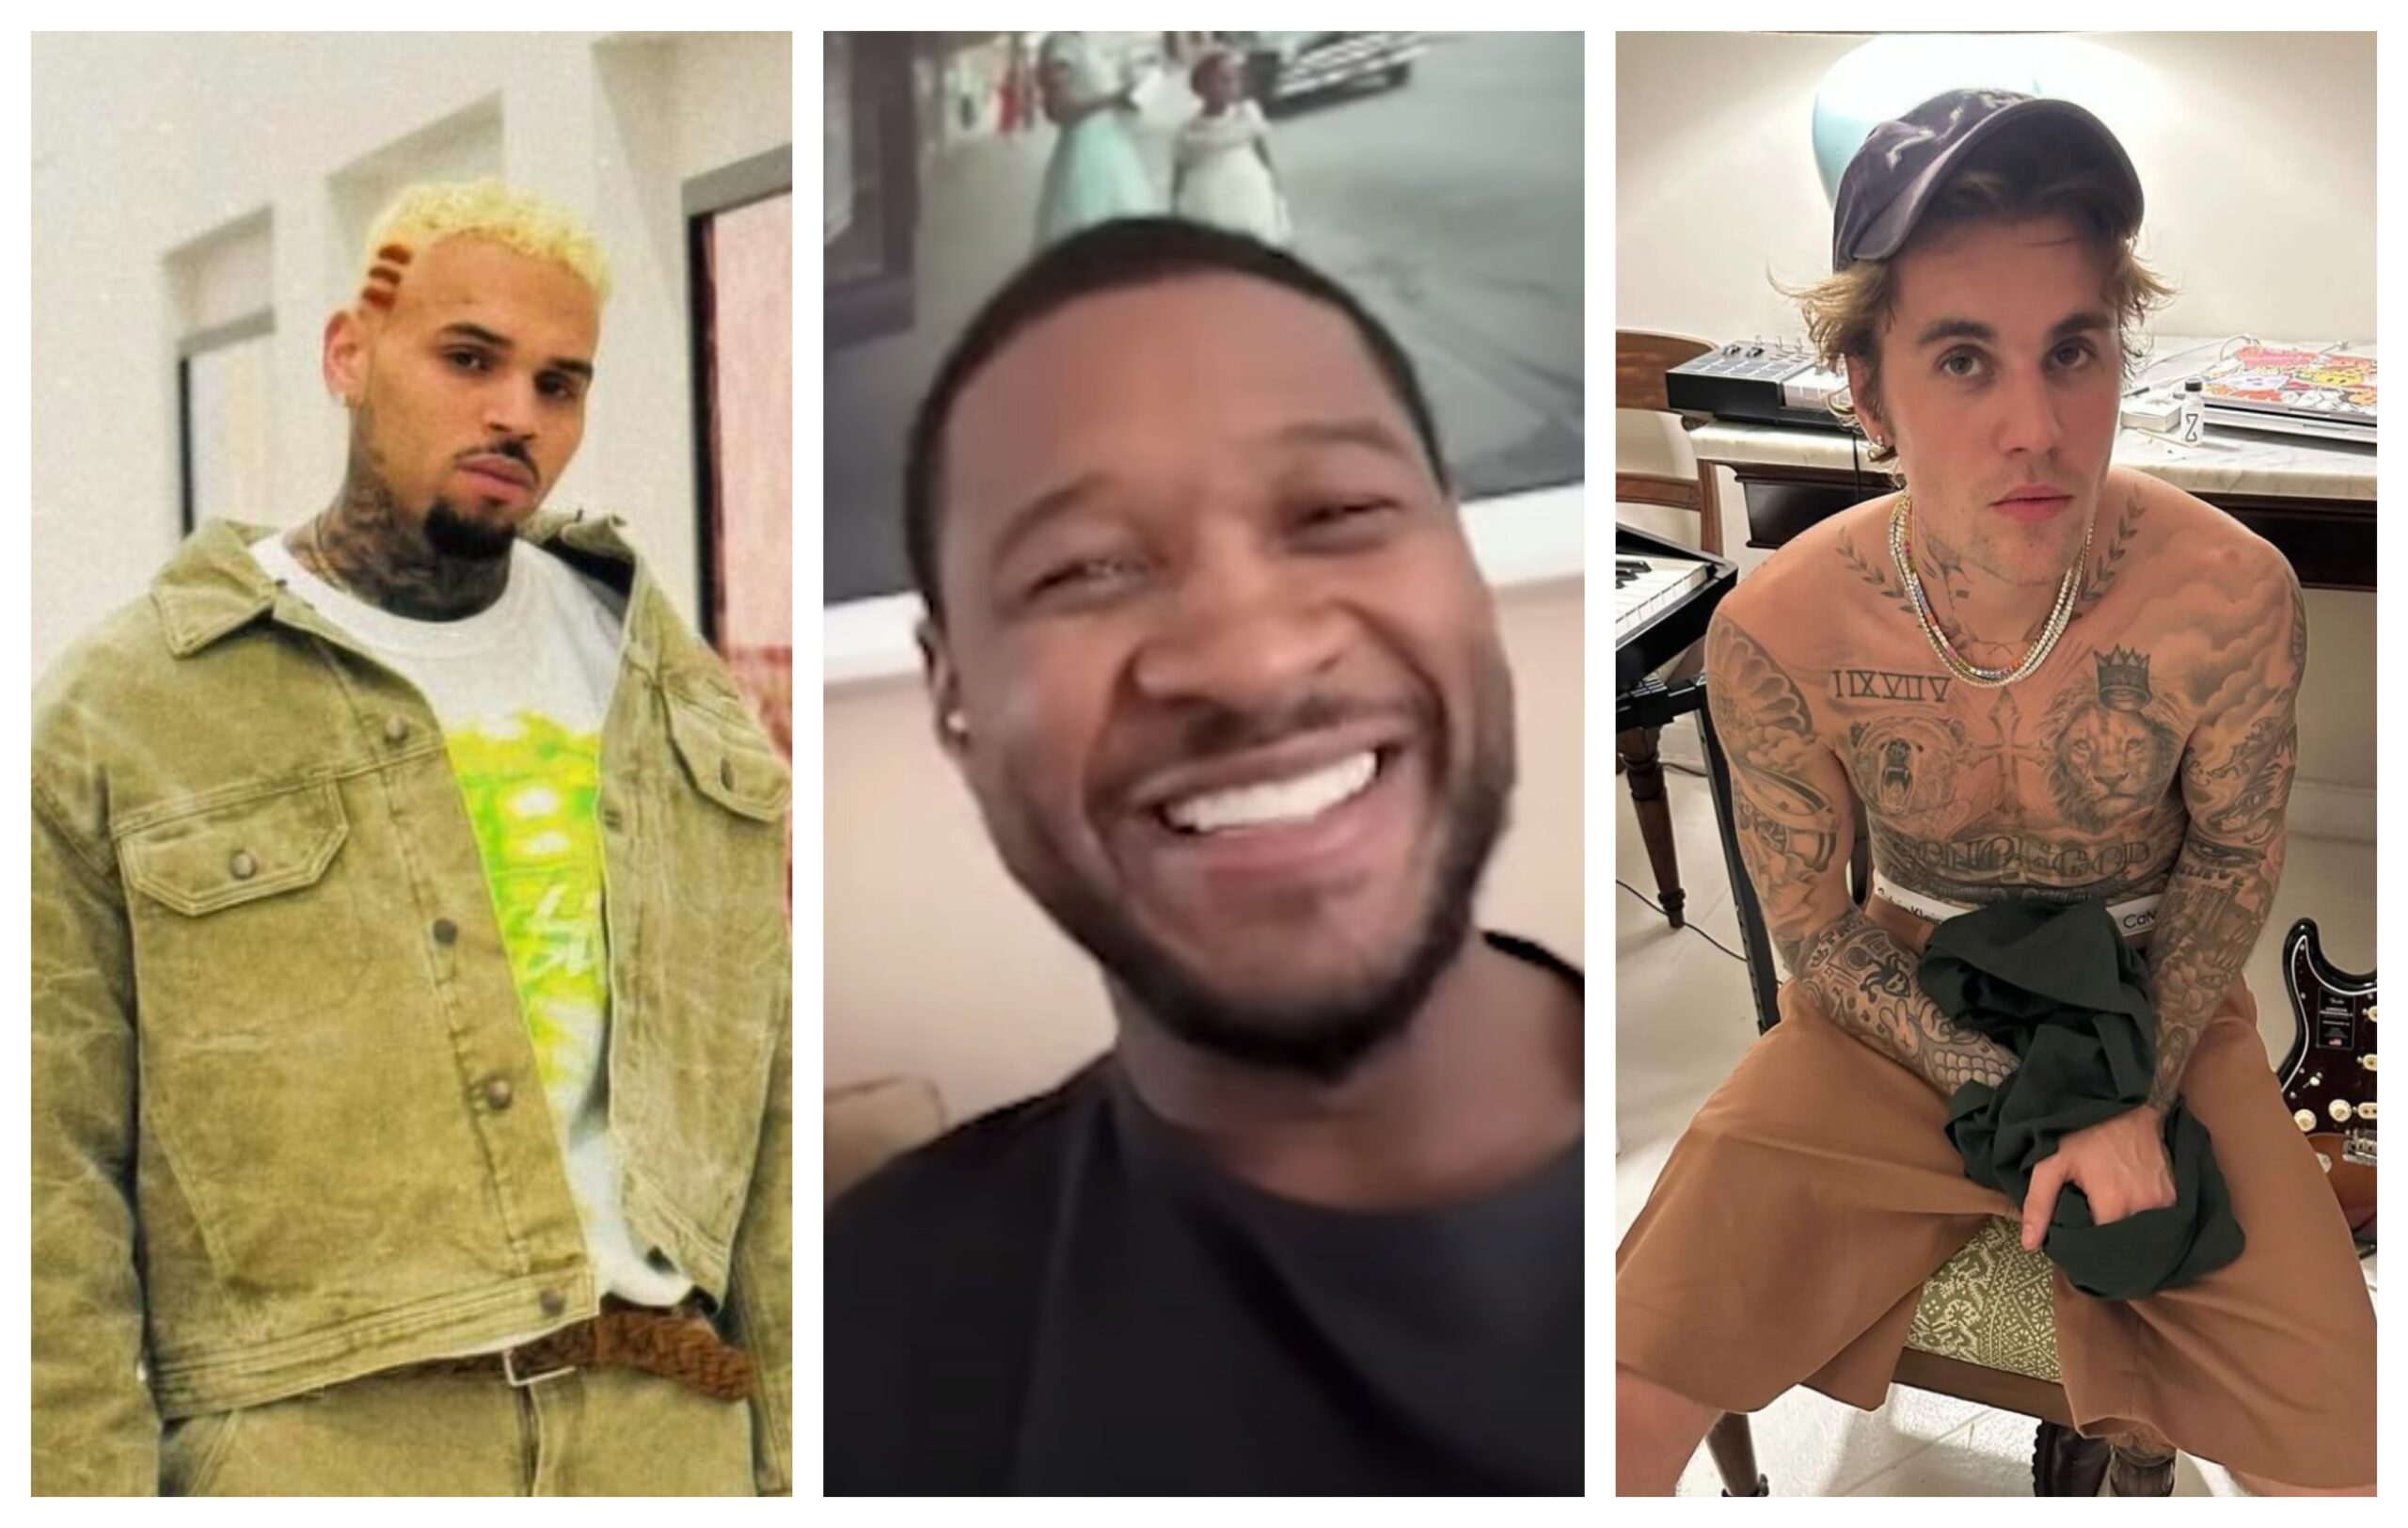 Usher Dishes on Rocking the Super Bowl, Alicia Keys, Justin Bieber’s Absence, Chris Brown Rumors, New Album, Tour, & More